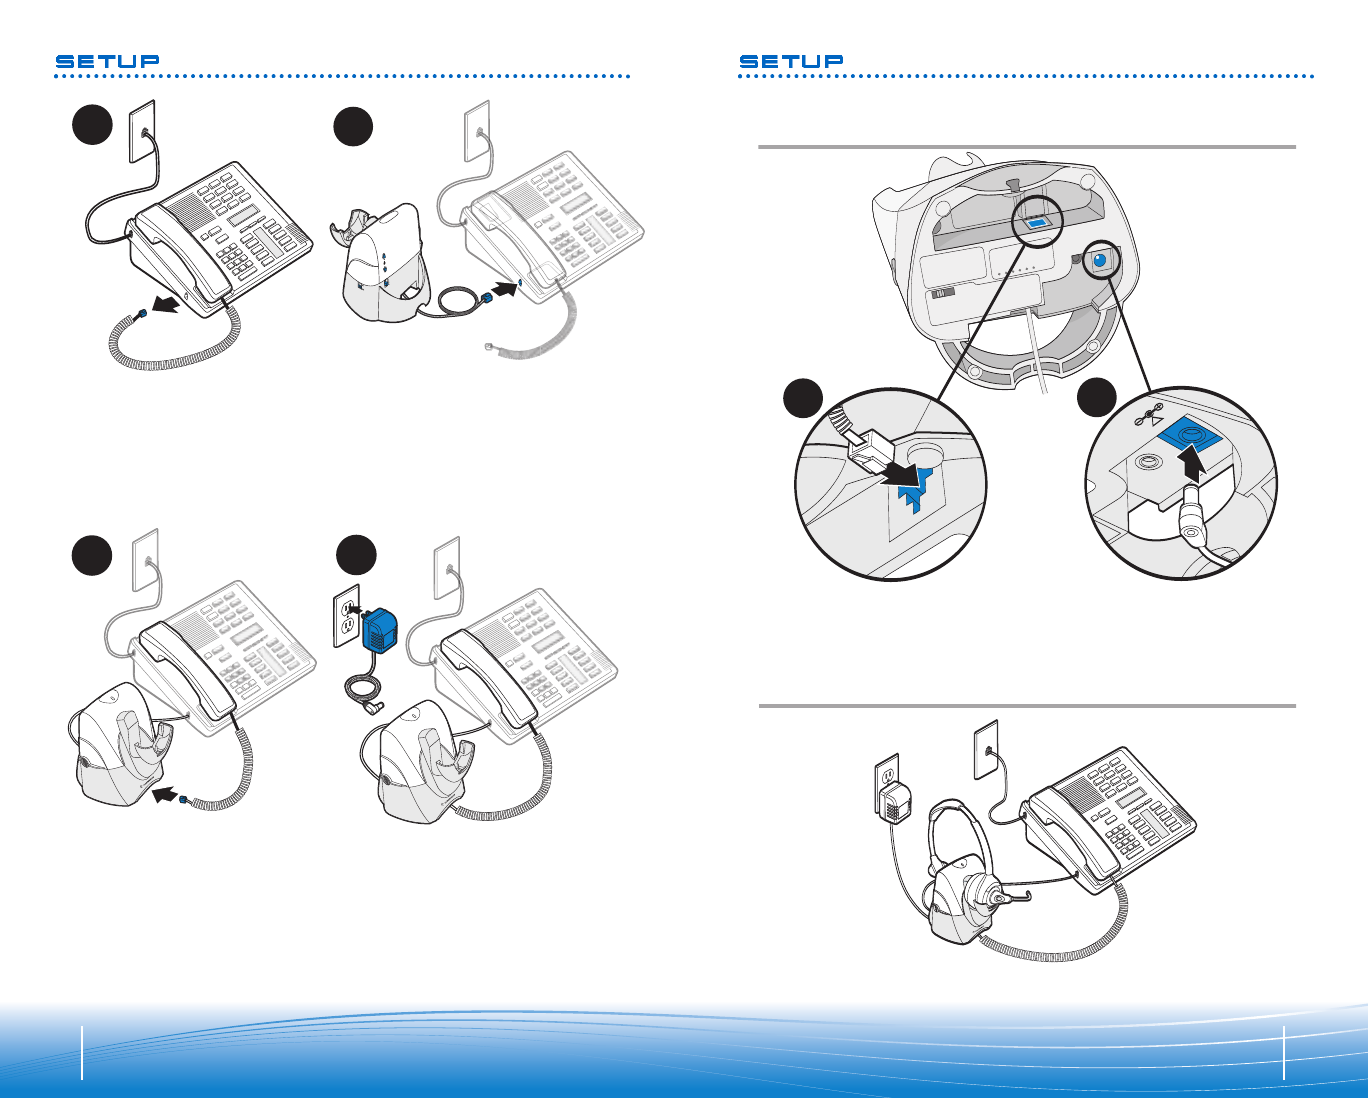 Page 4 of Plantronics Headphones Headset System User Guide